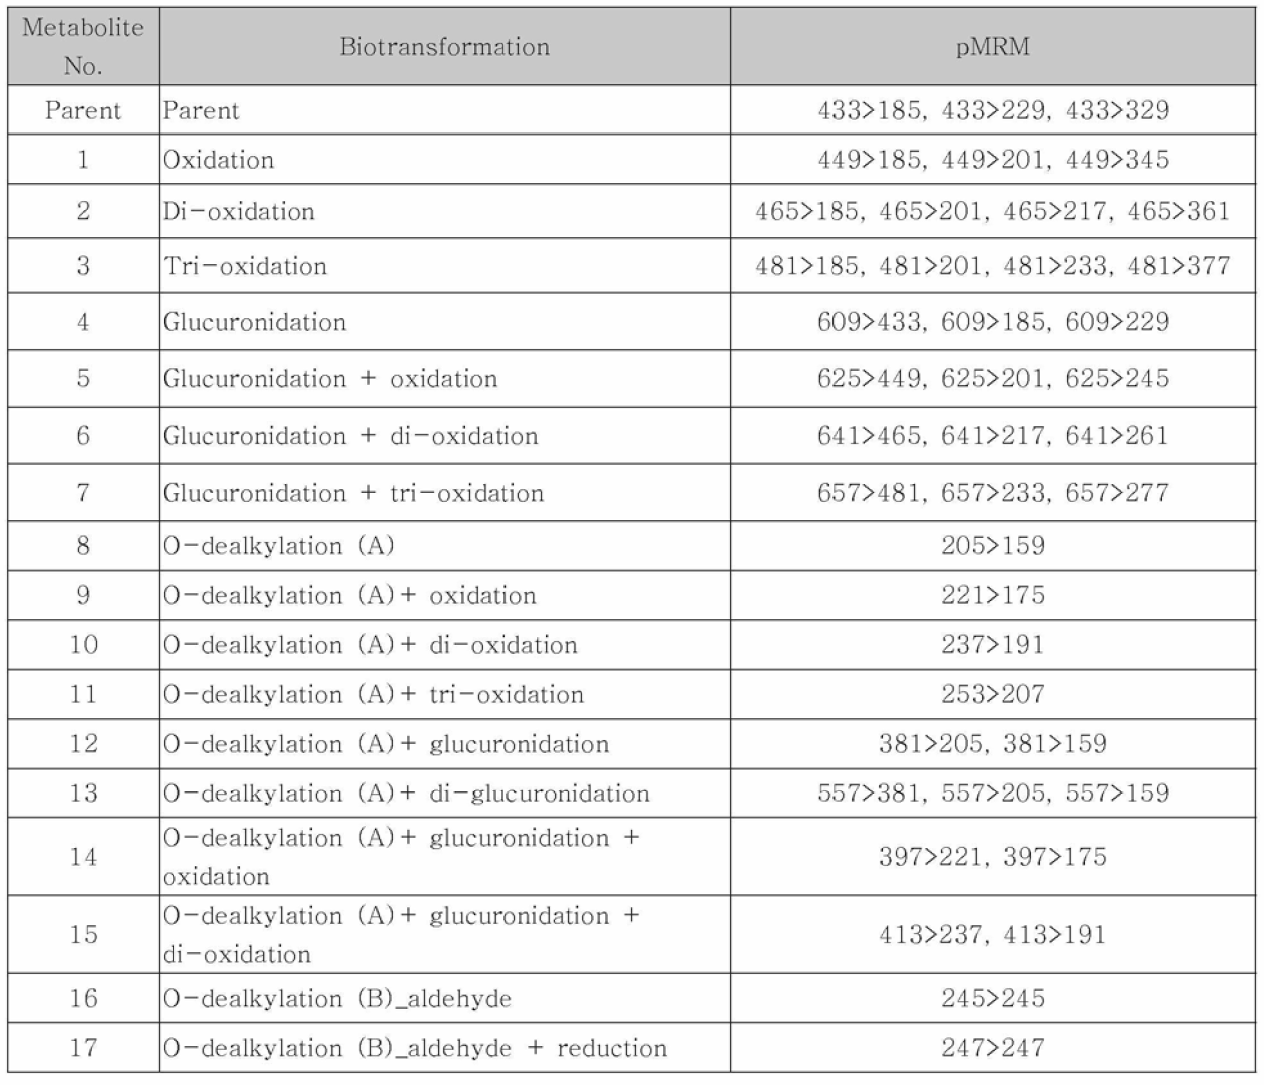 List of pMRMs for predicted metabolites